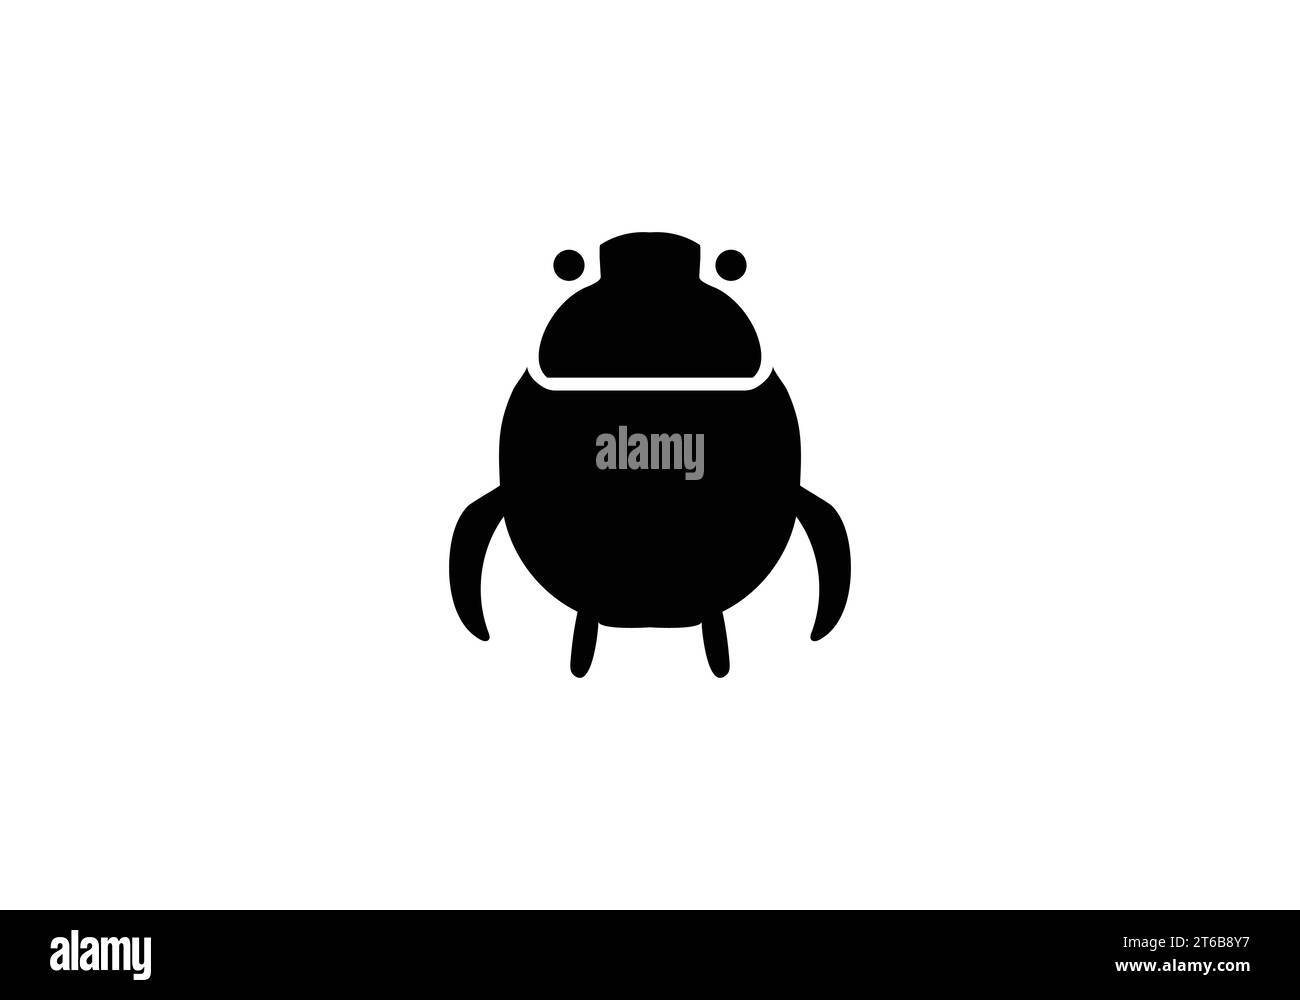 Biscuit Beetle minimal style  icon illustration design Stock Vector